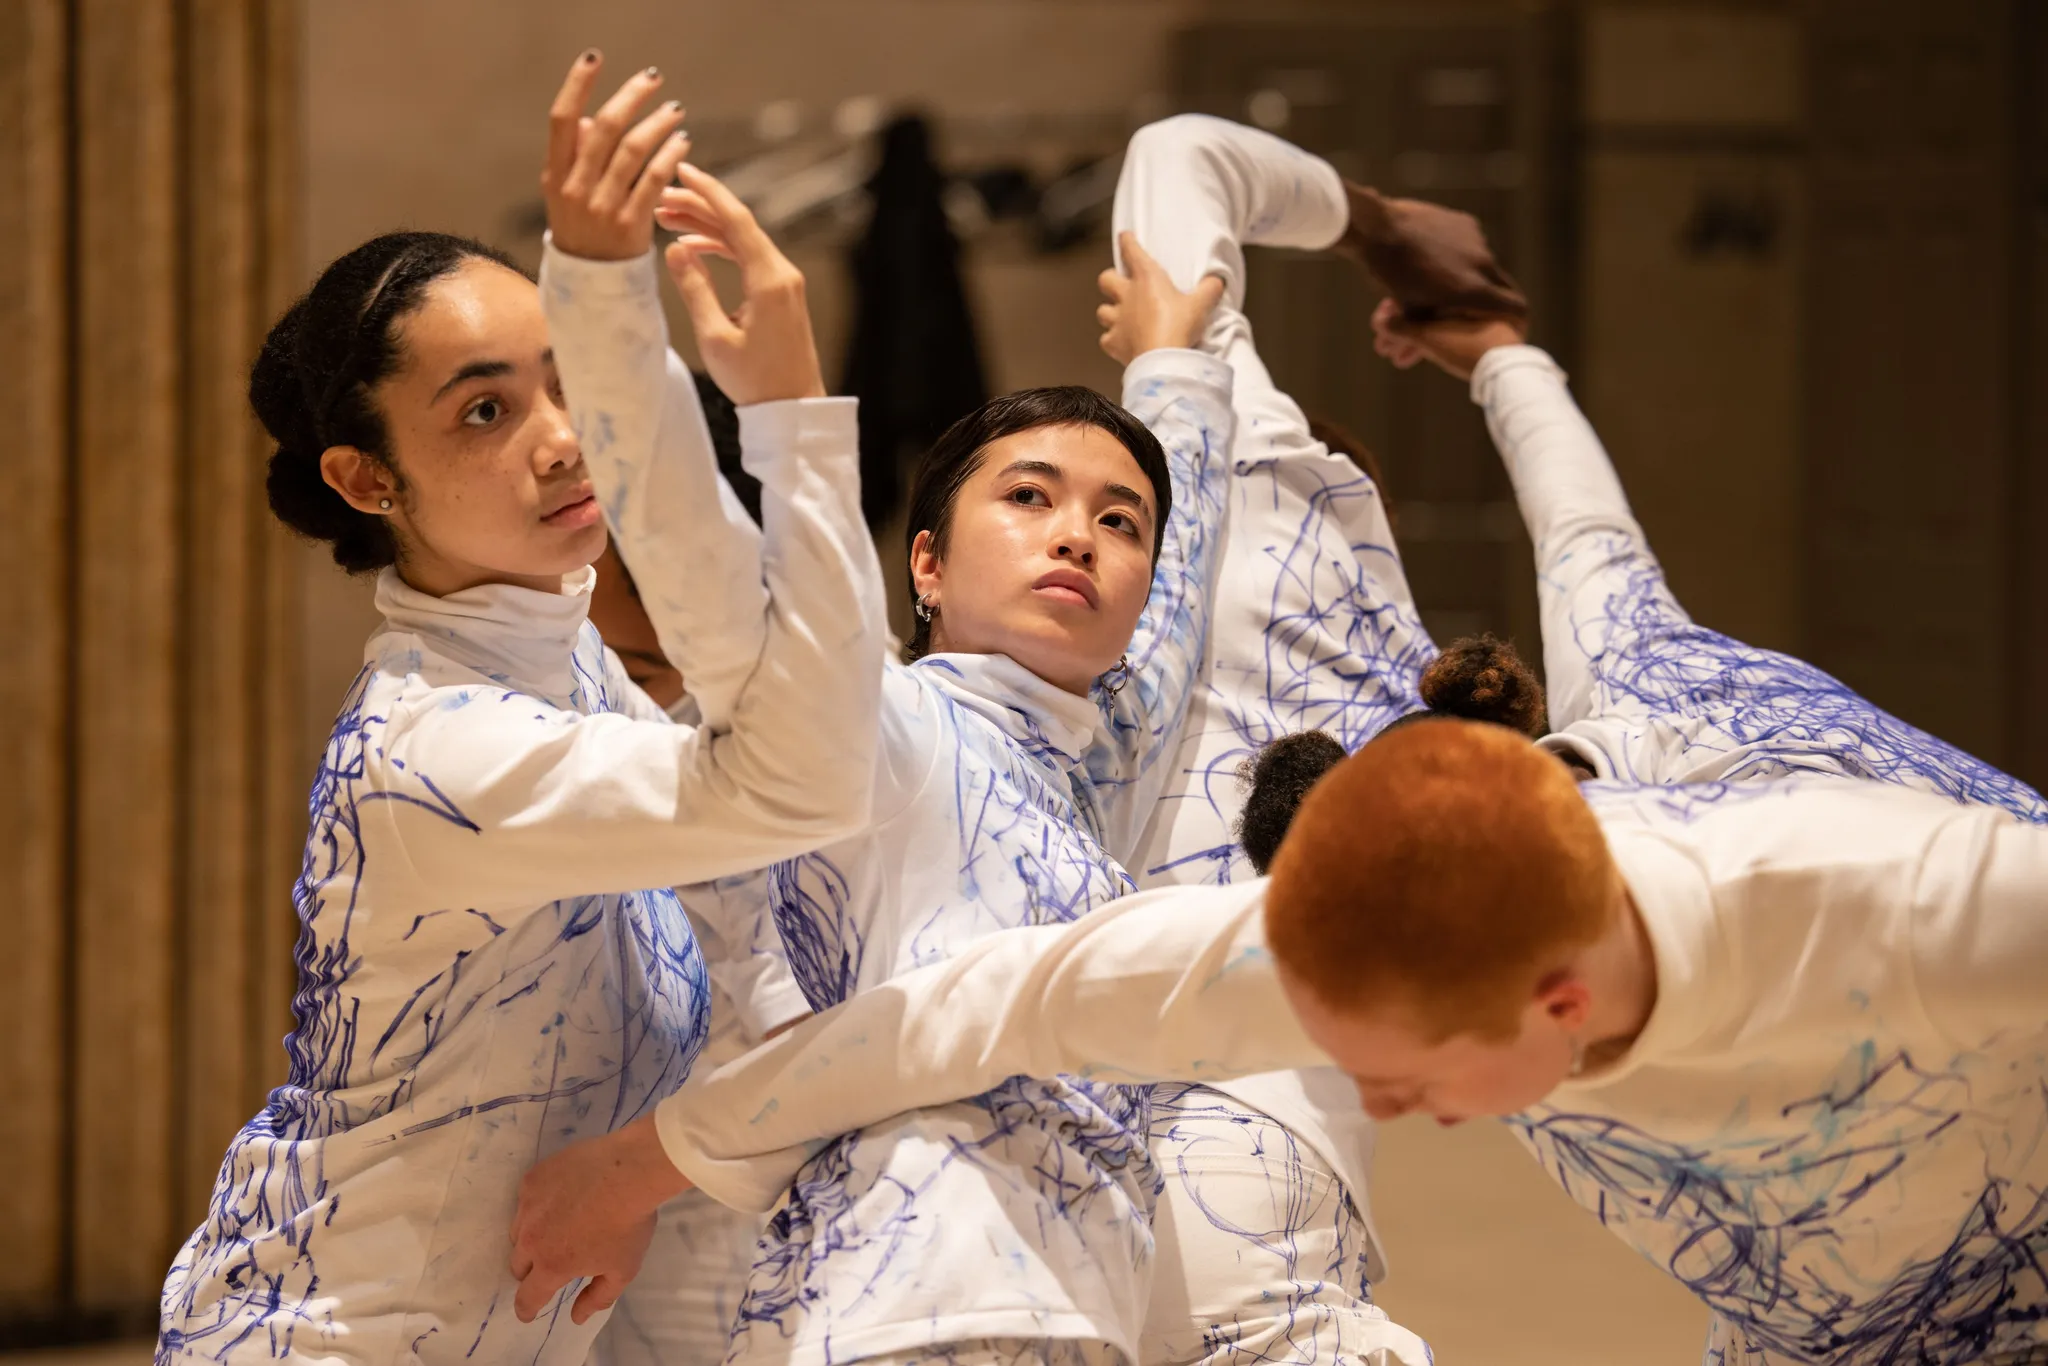 Five performers in a cohesive formation, connecting hands and gracefully moving as they prepare to embrace.